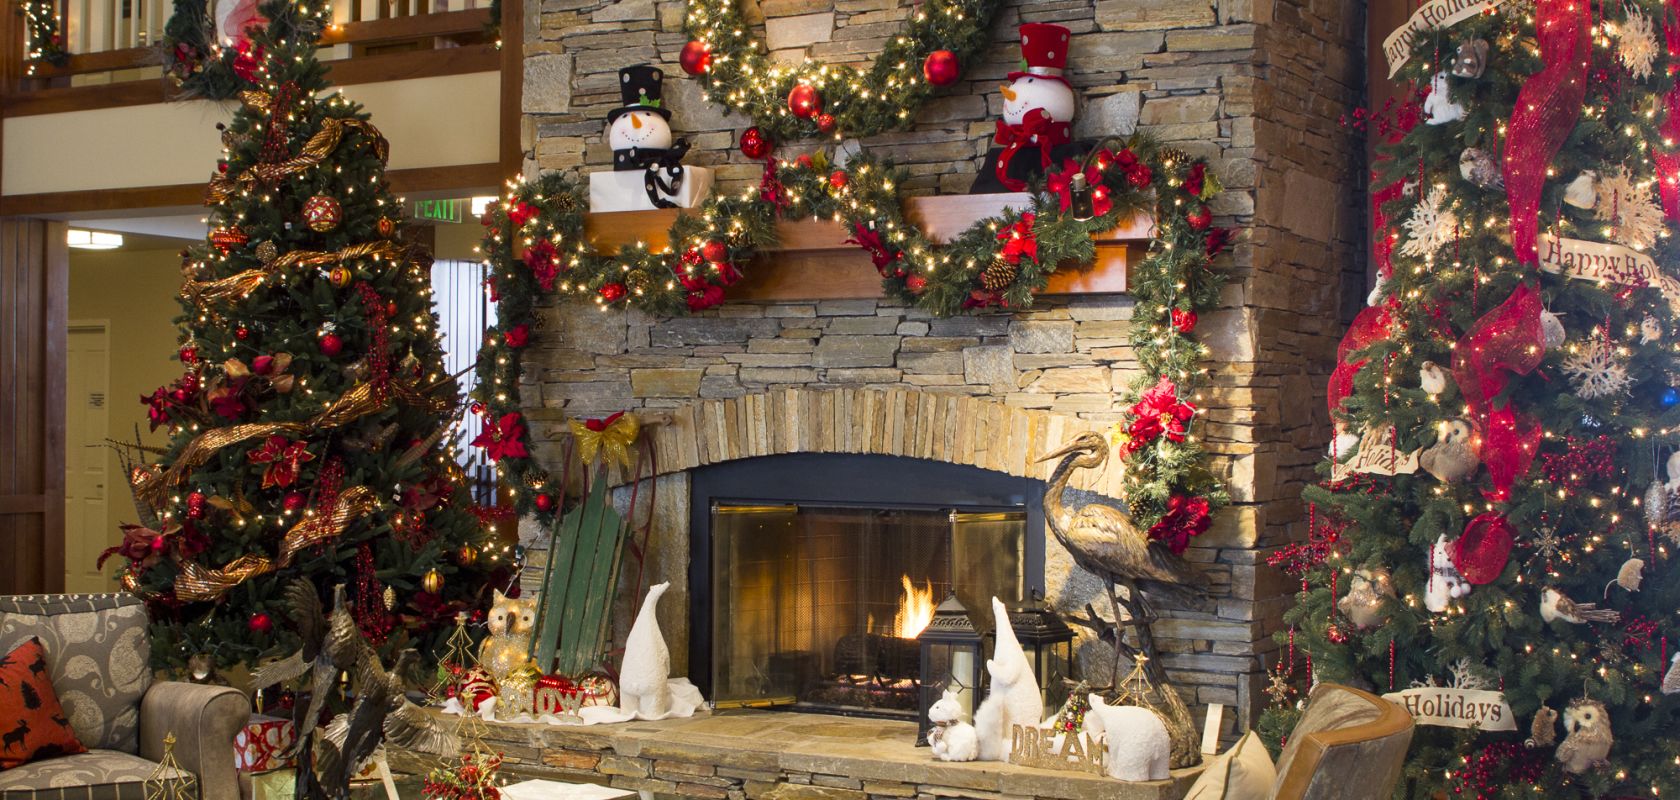 A Fire Place Sitting In A Living Room With A Christmas Tree